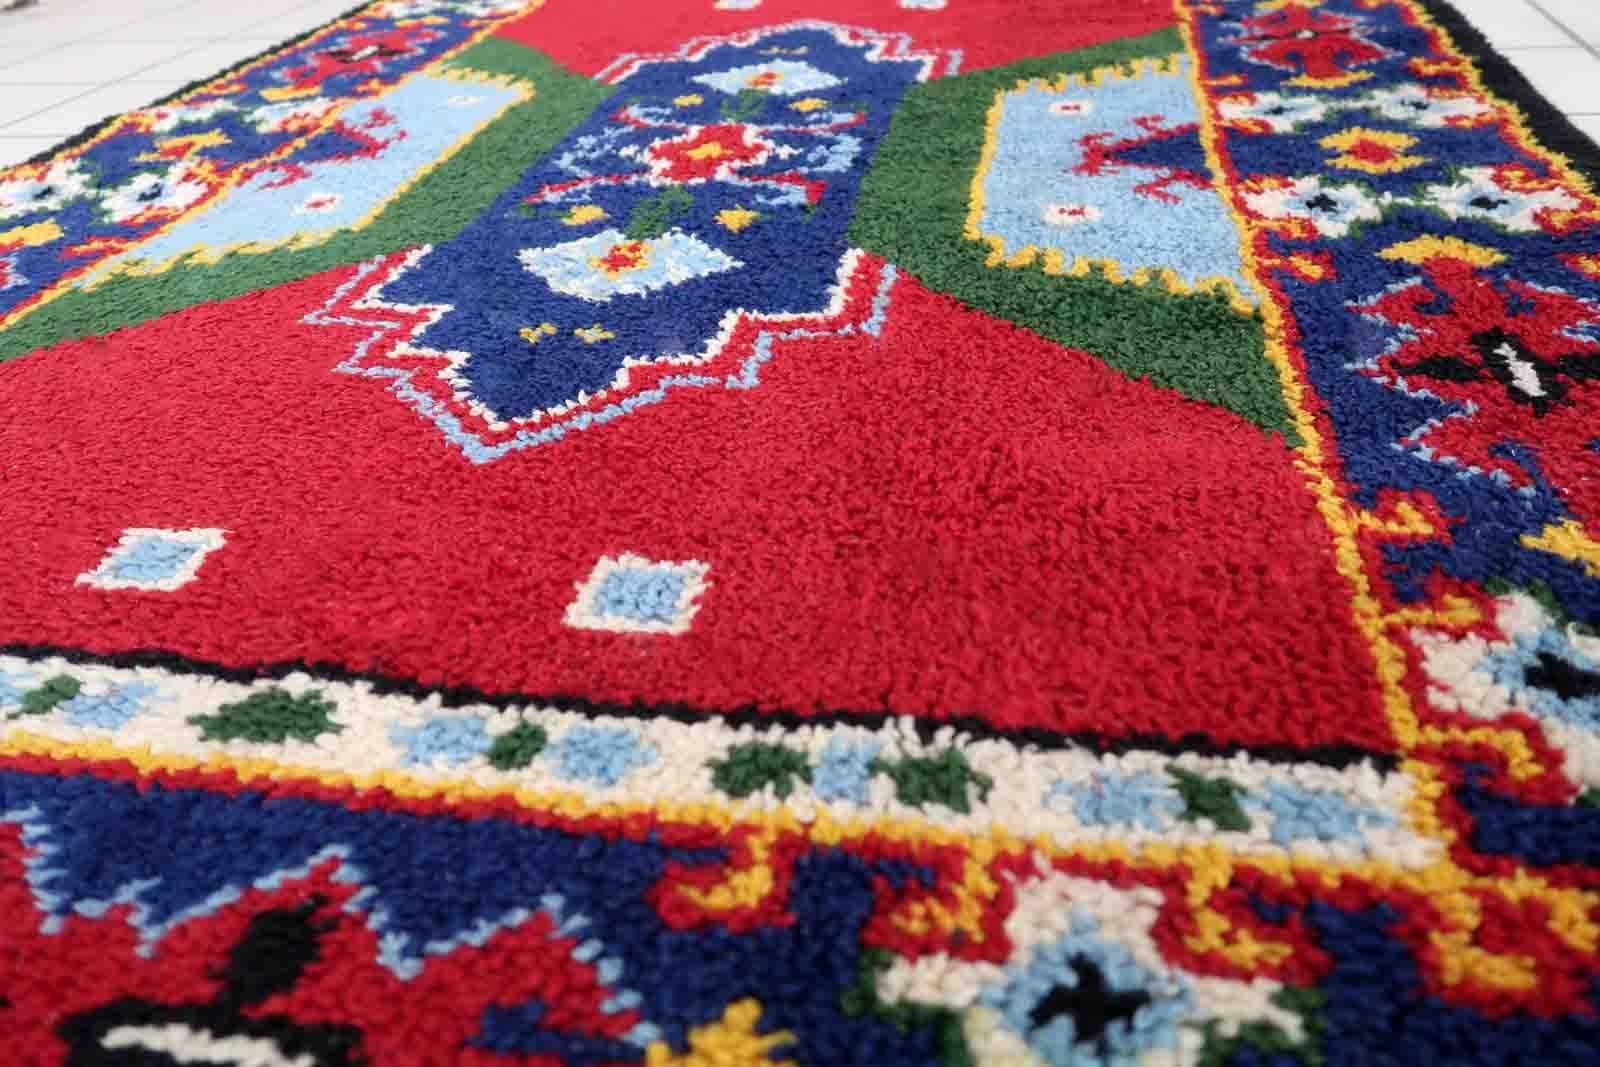 Vintage French Savonnerie rug in colorful shades. The rug has been made in wool in the middle of 20th century. It is in original good condition.

-condition: original good,

-circa: 1950s,

-size: 3.8' x 5.7' (117cm x 174cm),

-material: